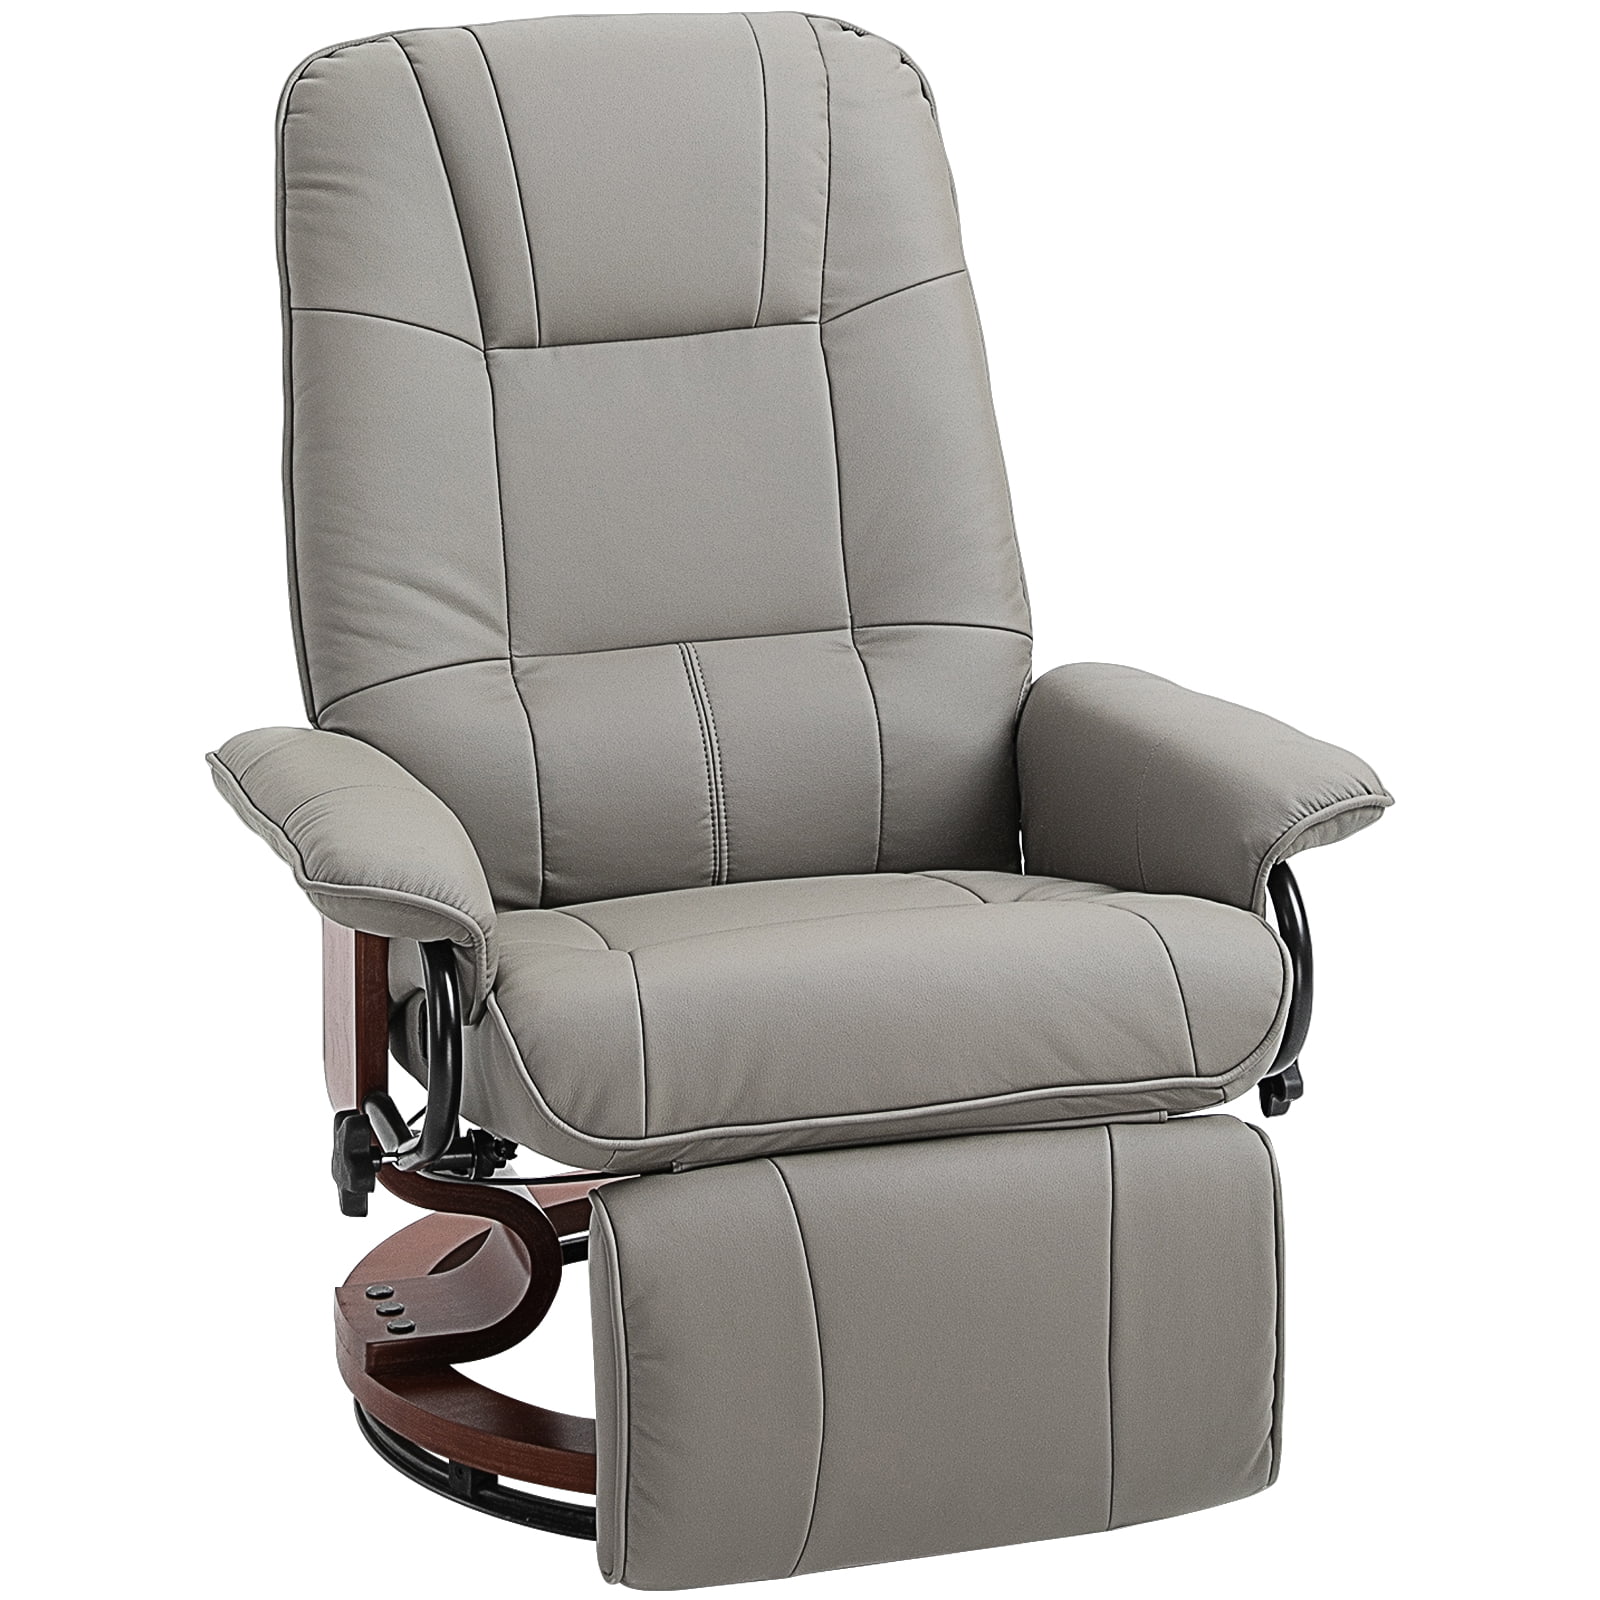 HomCom Faux Leather Adjustable Manual Swivel Base Recliner Chair with